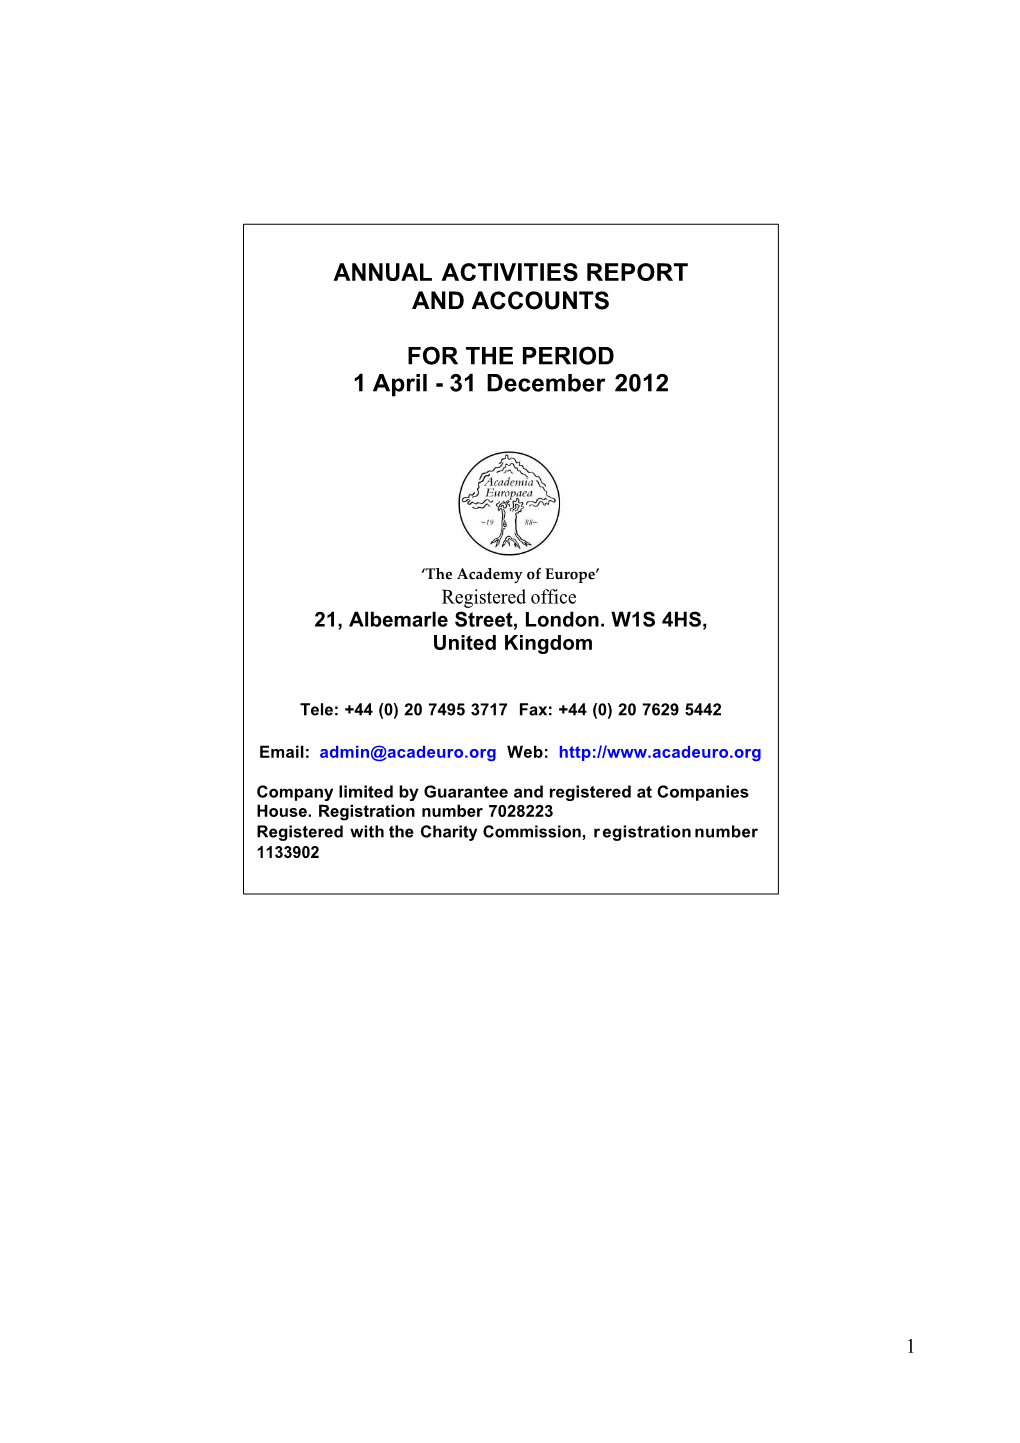 Annual Activities Report and Accounts for the Period 1